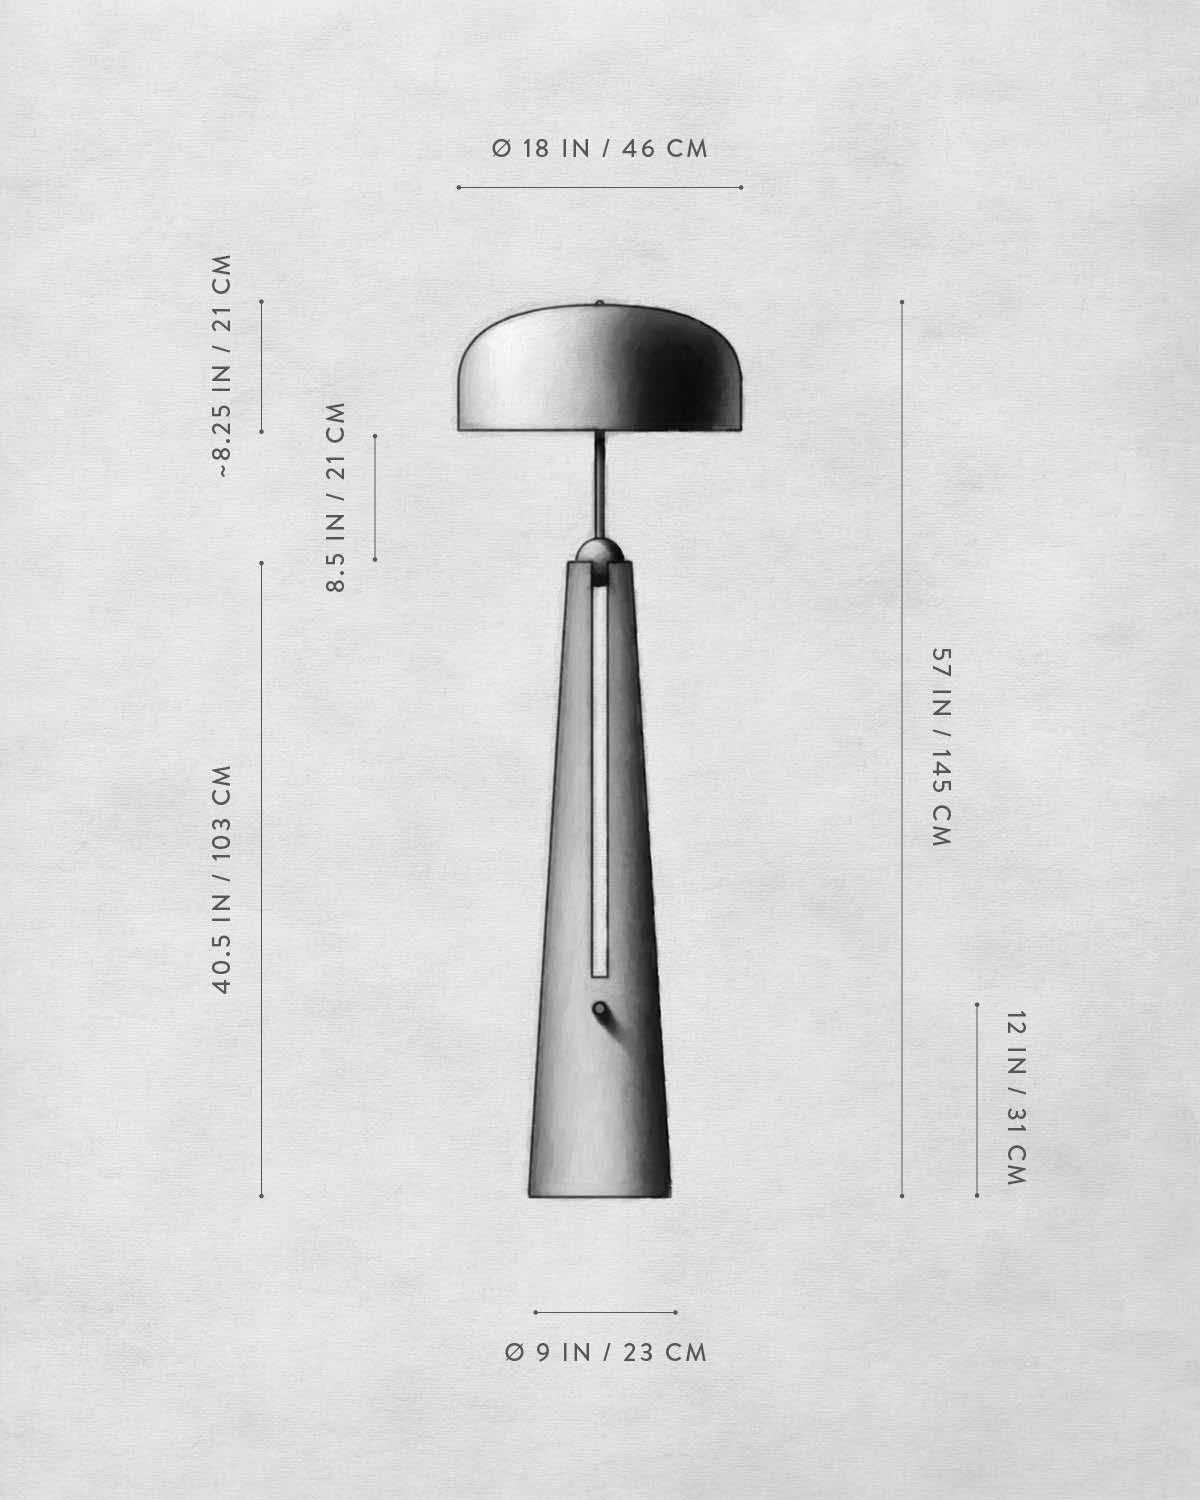 Technical drawing of METRONOME : FLOOR LAMP.